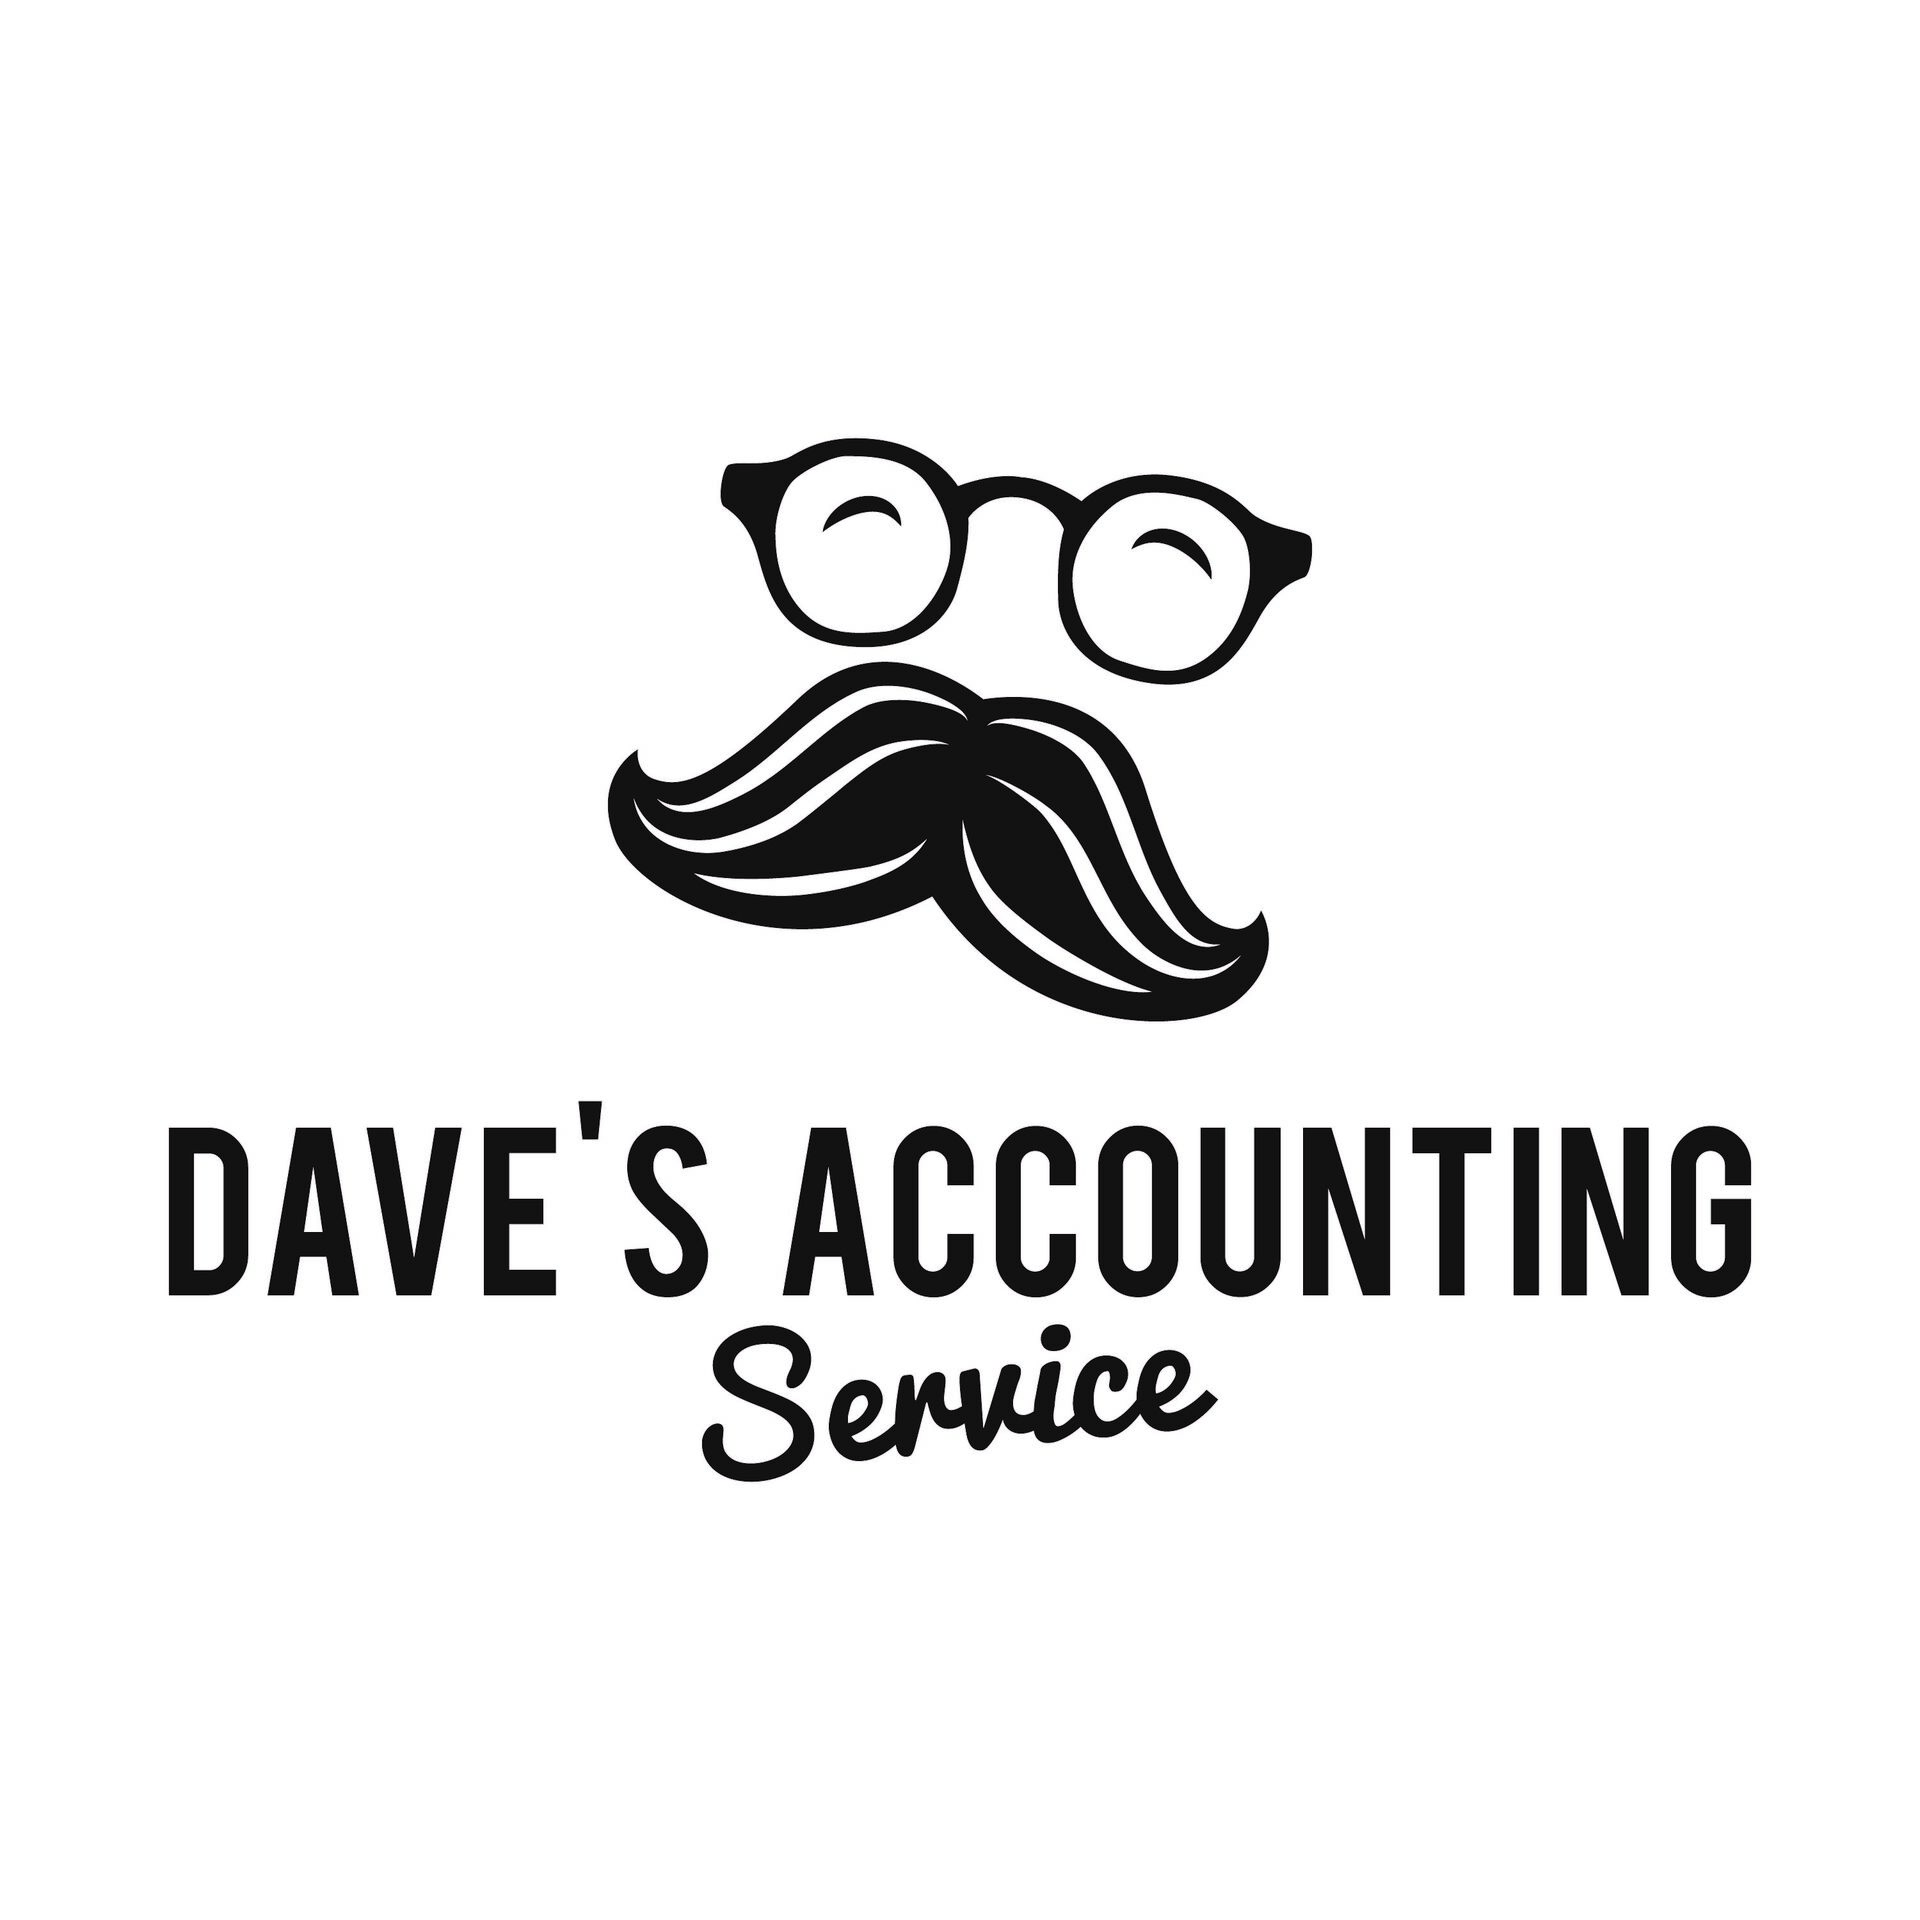 Dave's Accounting Service 